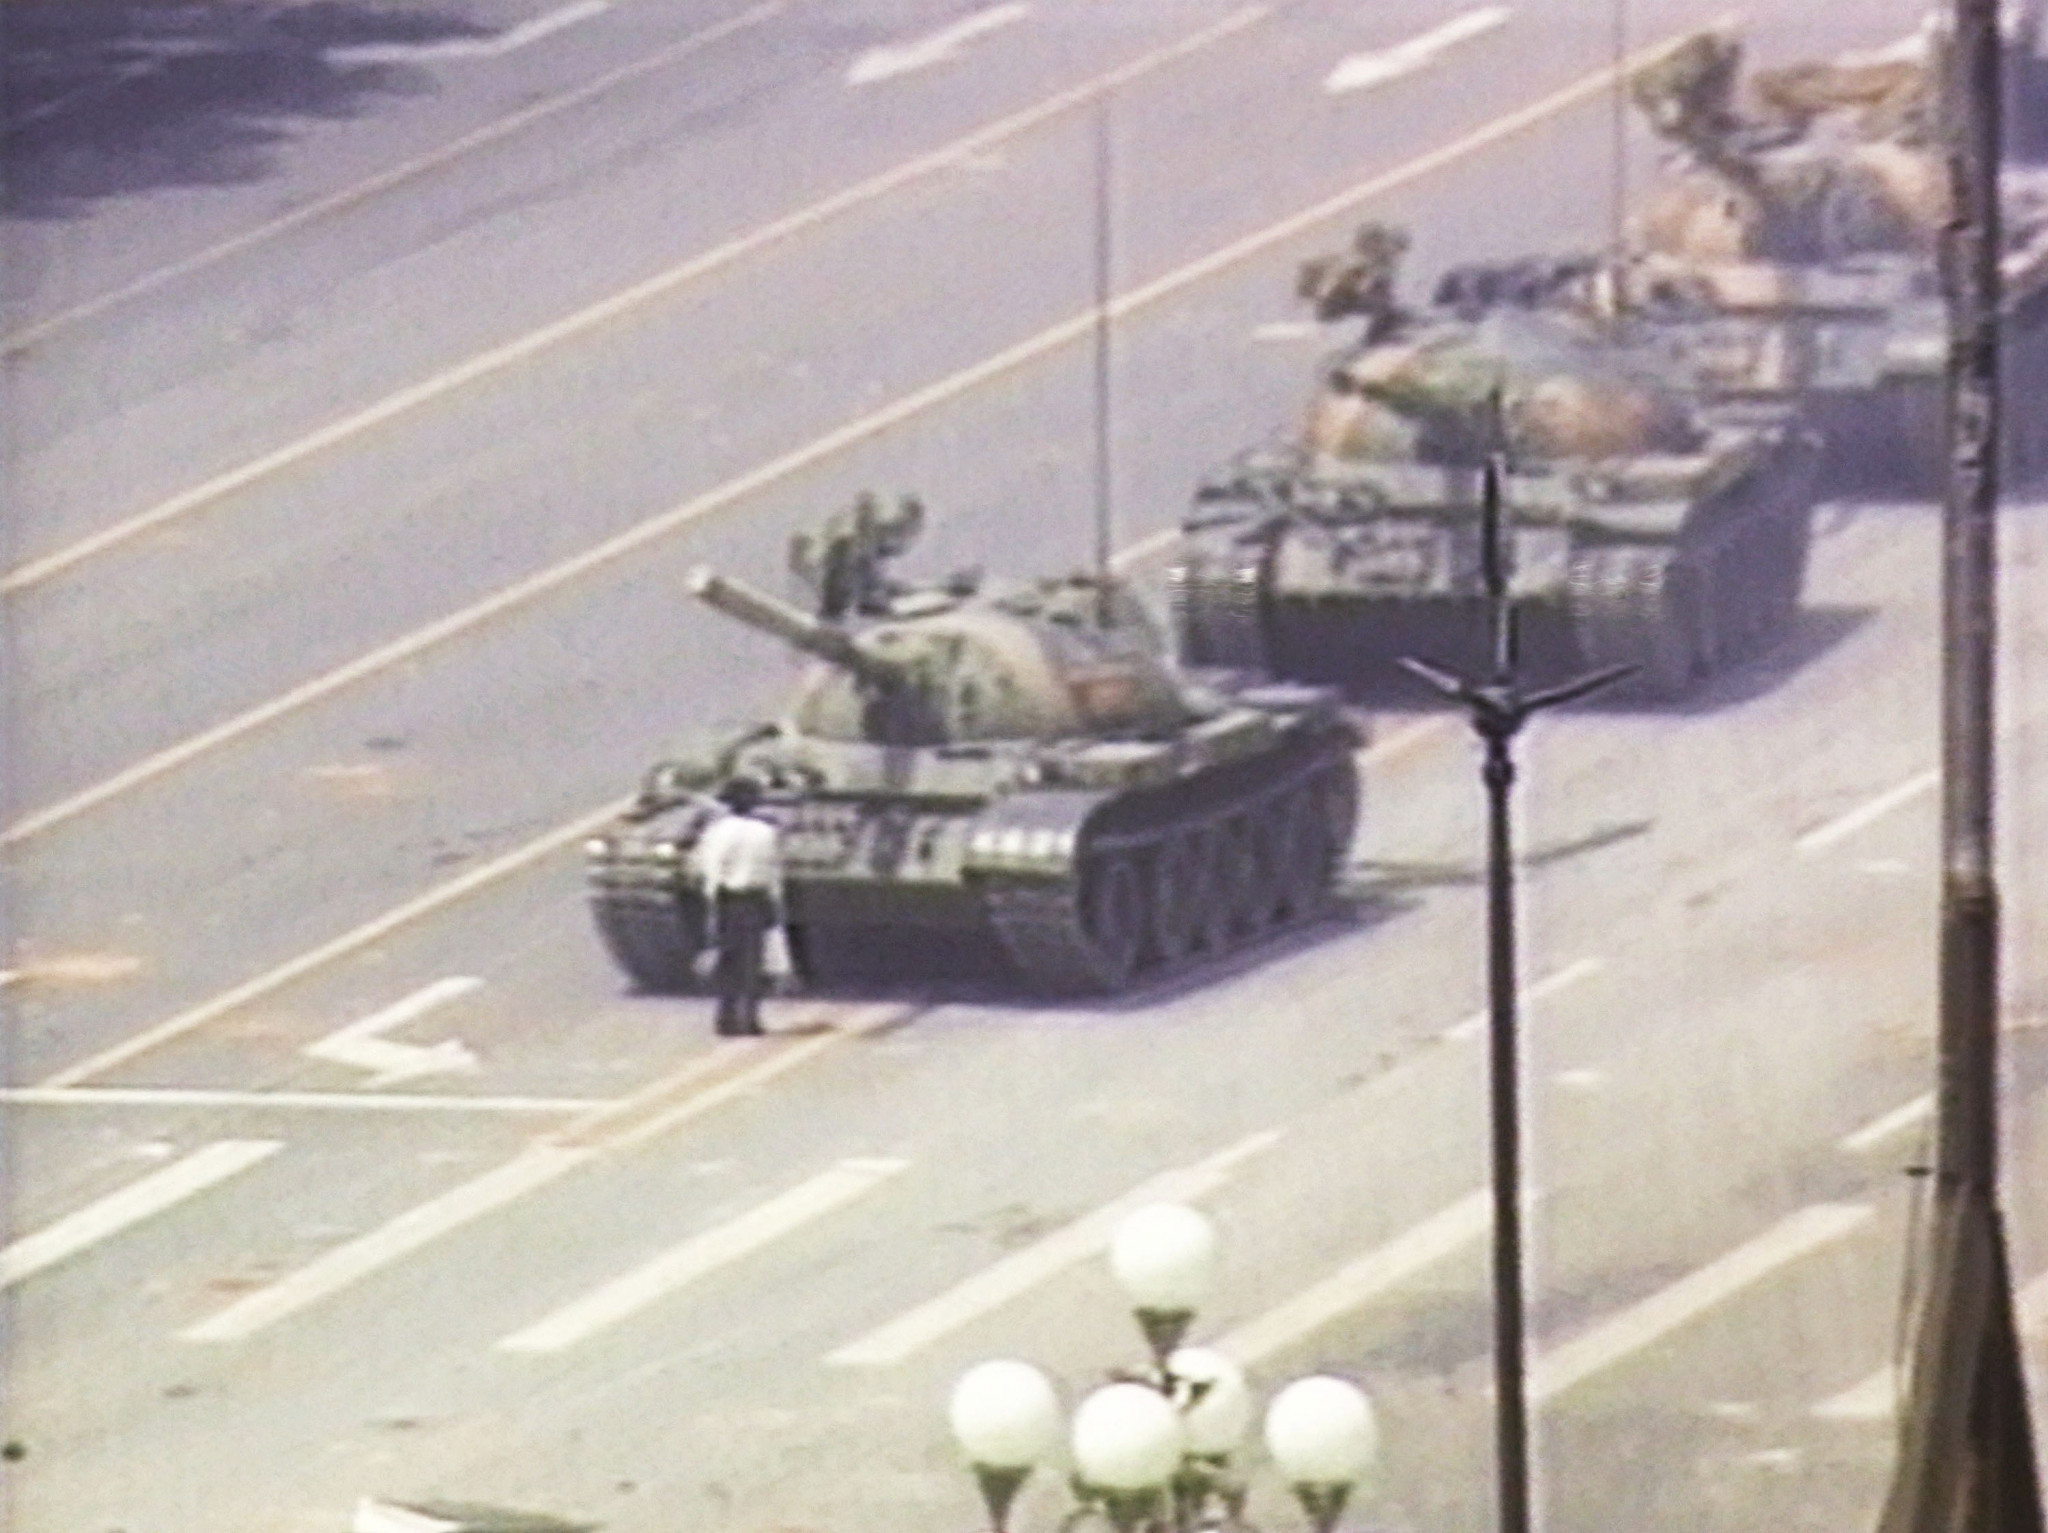 Student protests inTiananmen Square in 1989 were put down forcibly by the Chinese Government ©Wikipedia